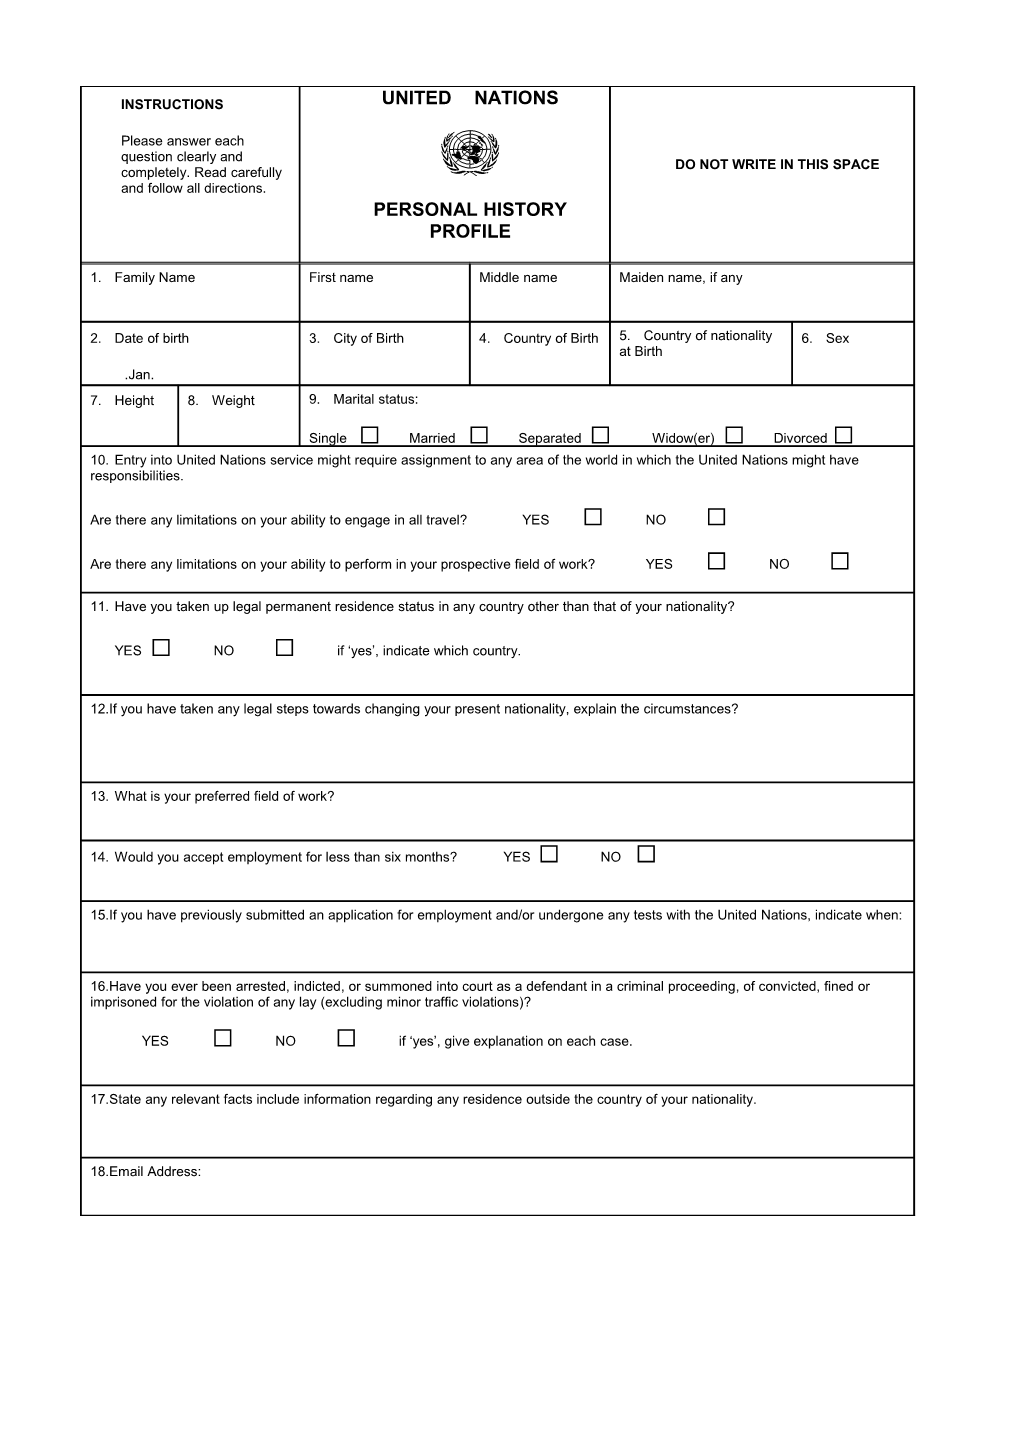 Additional Pages Are Provided for Employment Record Only